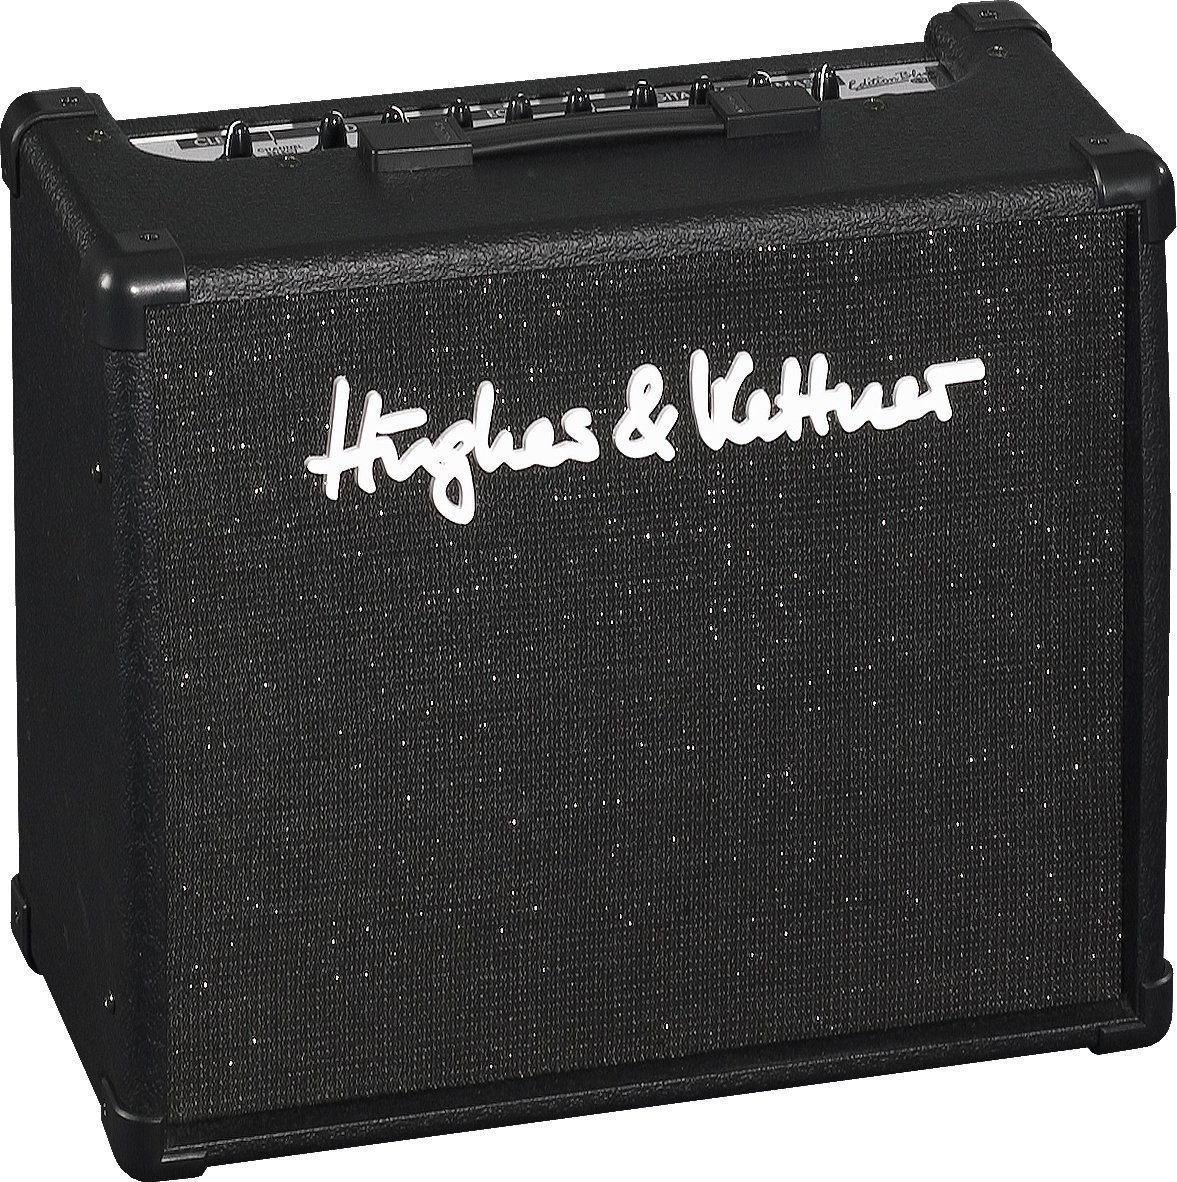 Solid-State Combo Hughes & Kettner Edition Blue 15 R